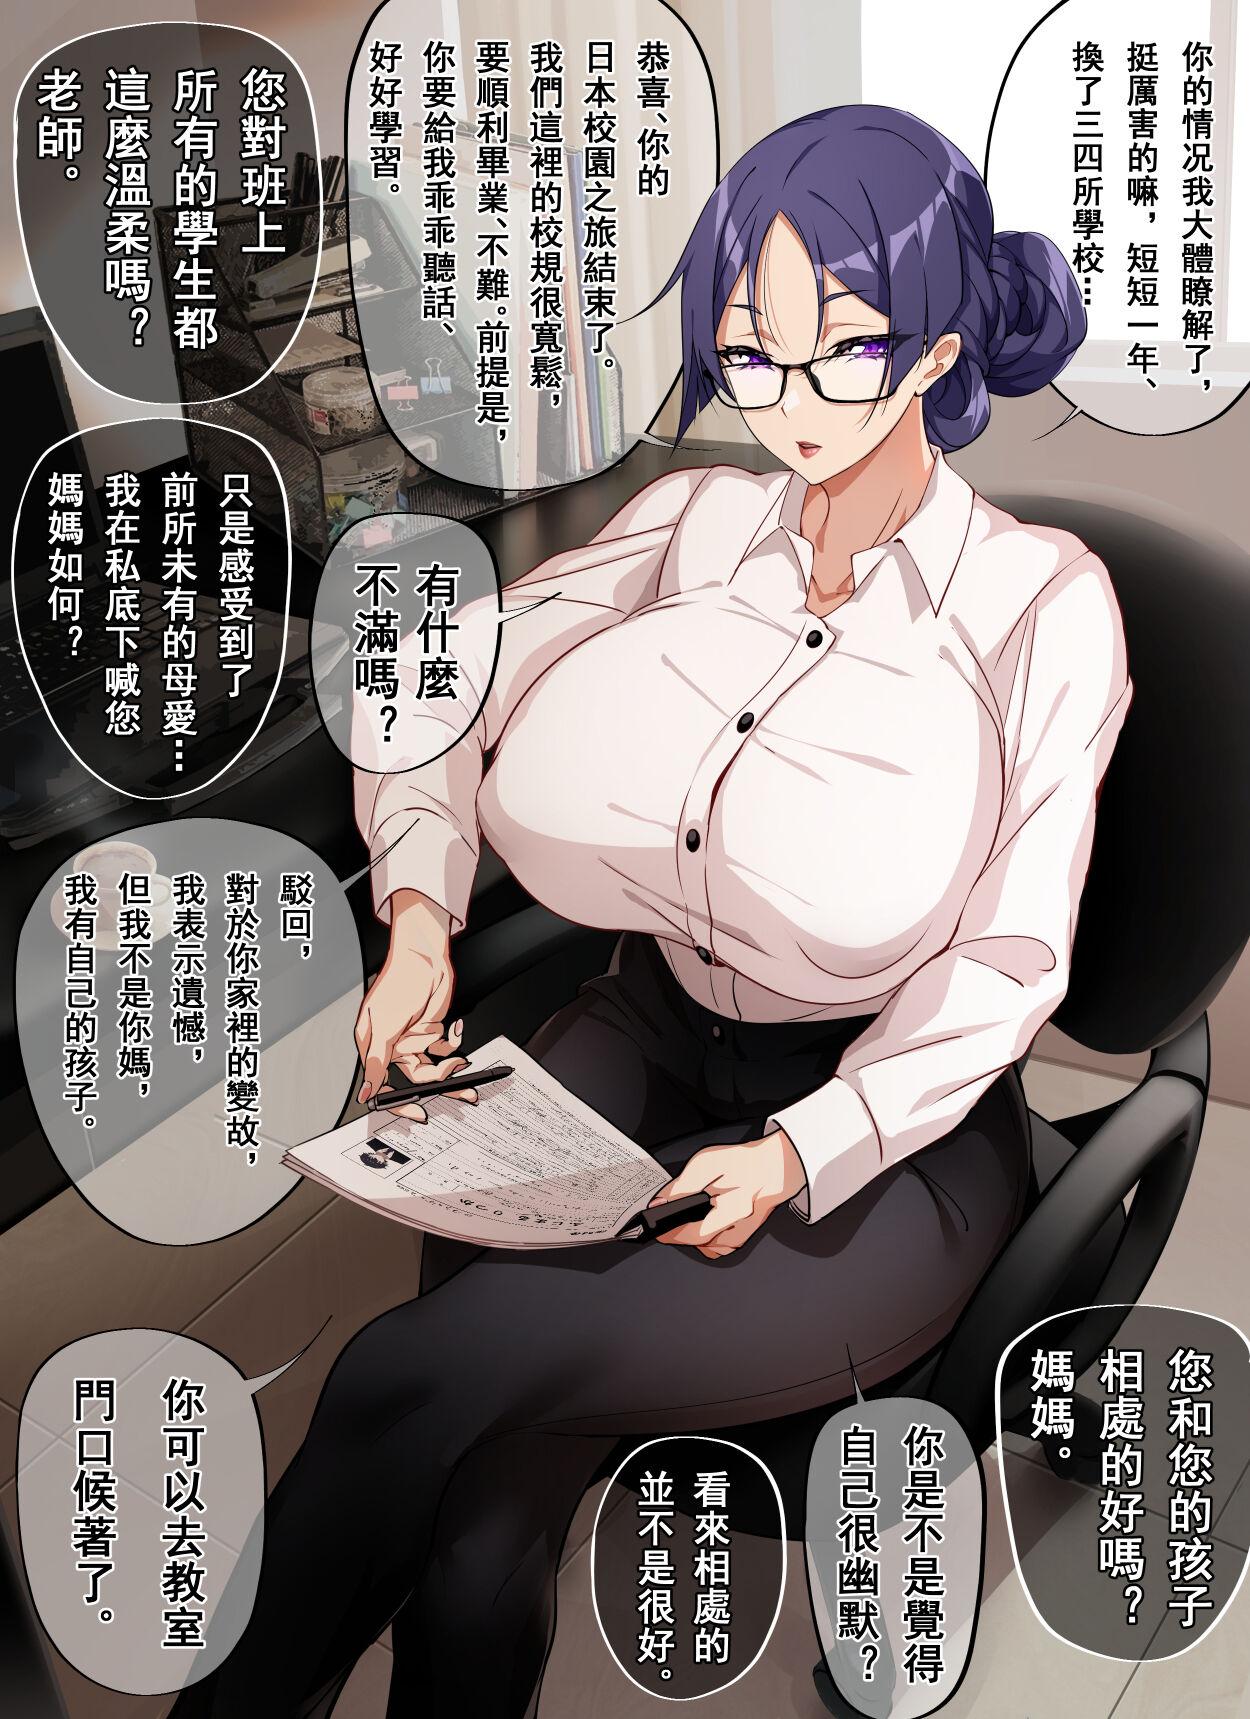 Cam Girl Teacher, can I call you mom? - Fate grand order Van - Page 1